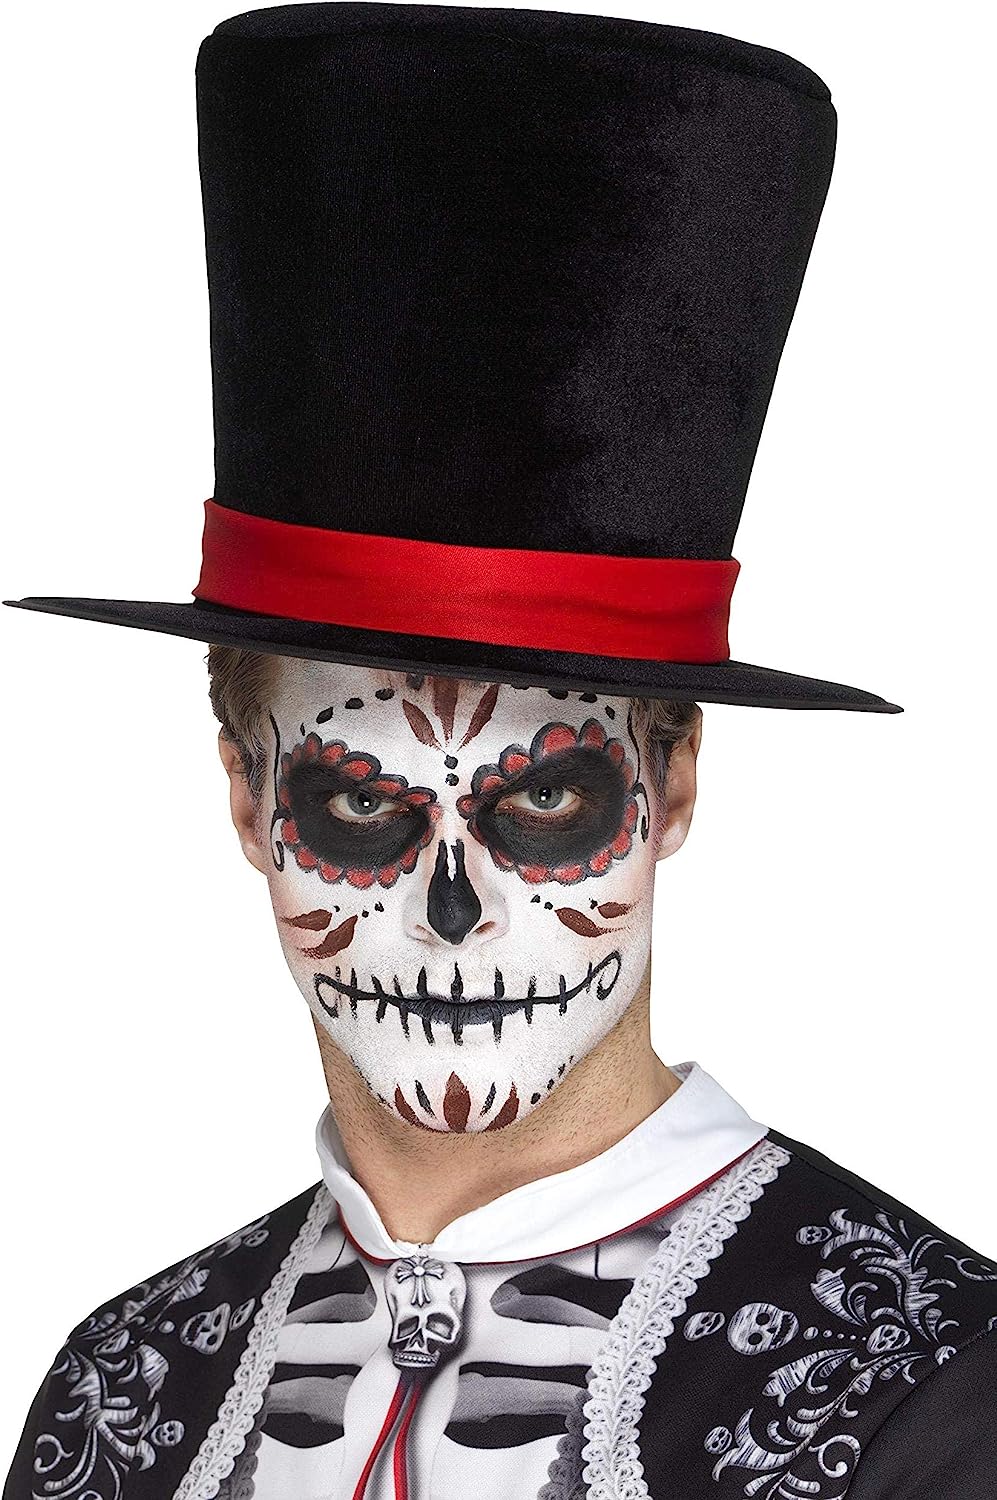 Smiffys 48172 Day of The Dead Top Hat, Black, One Size